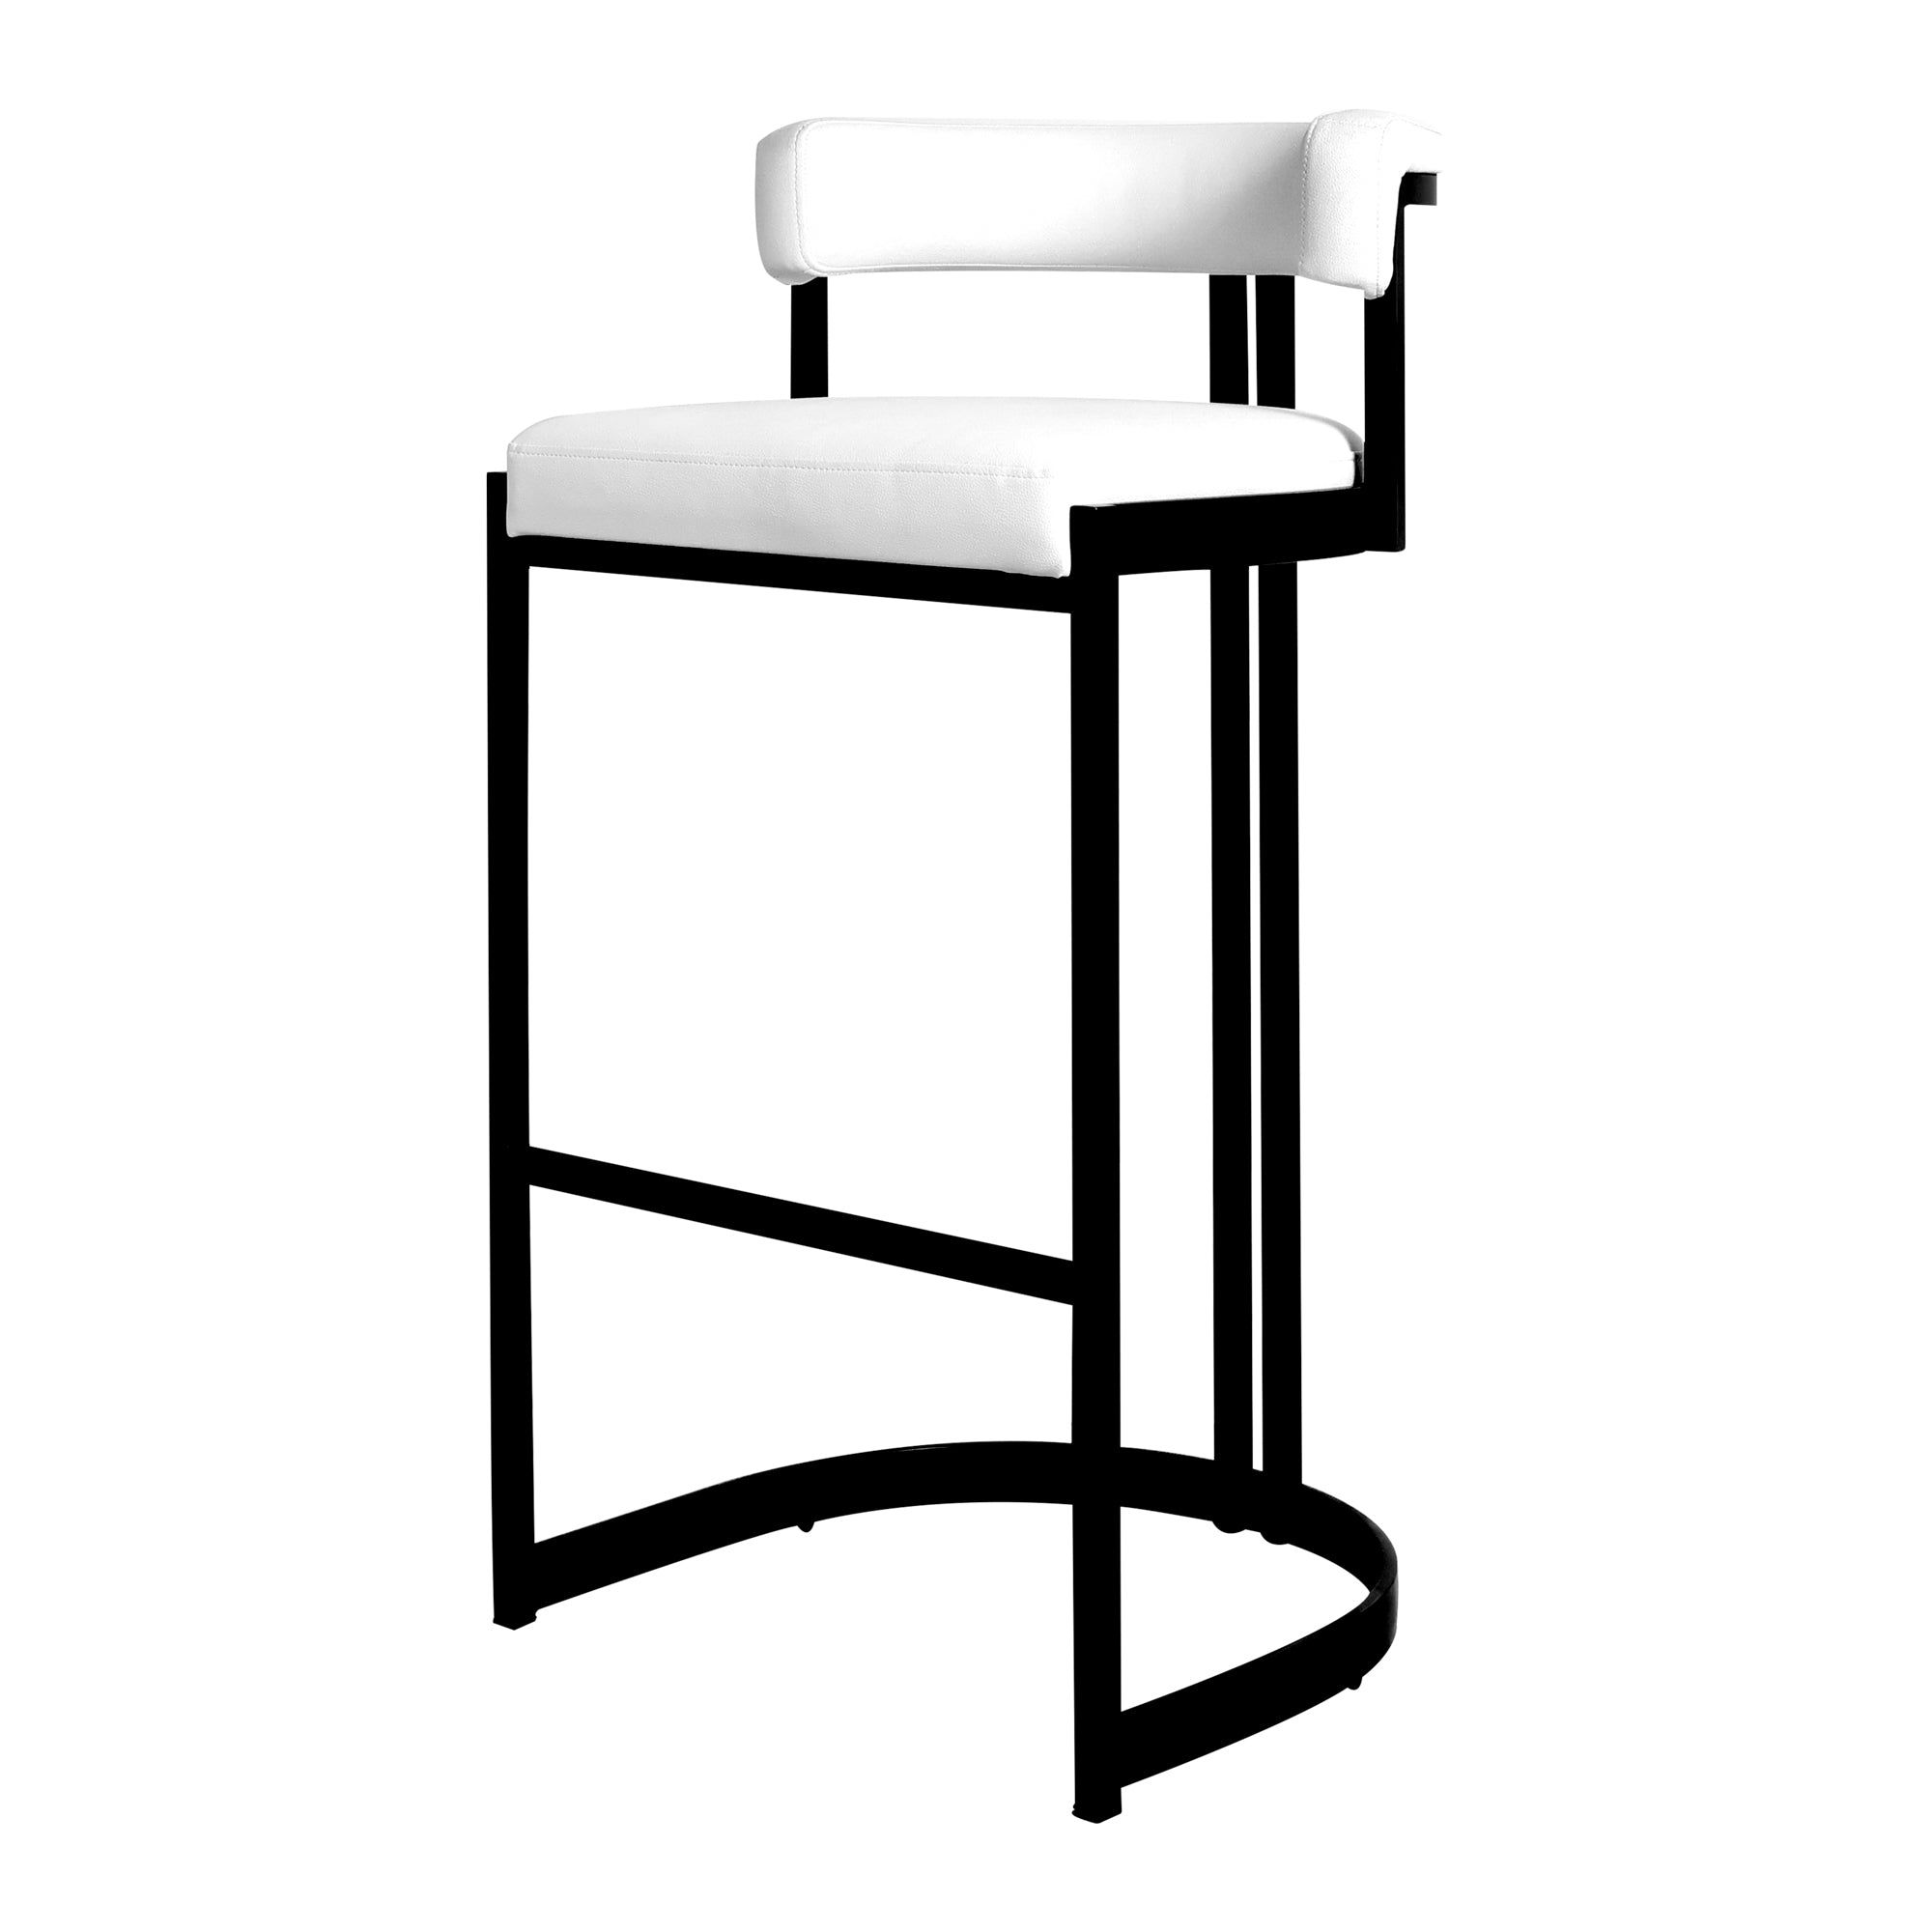 Monochrome Counter Stools: A Timeless Addition to Any Kitchen